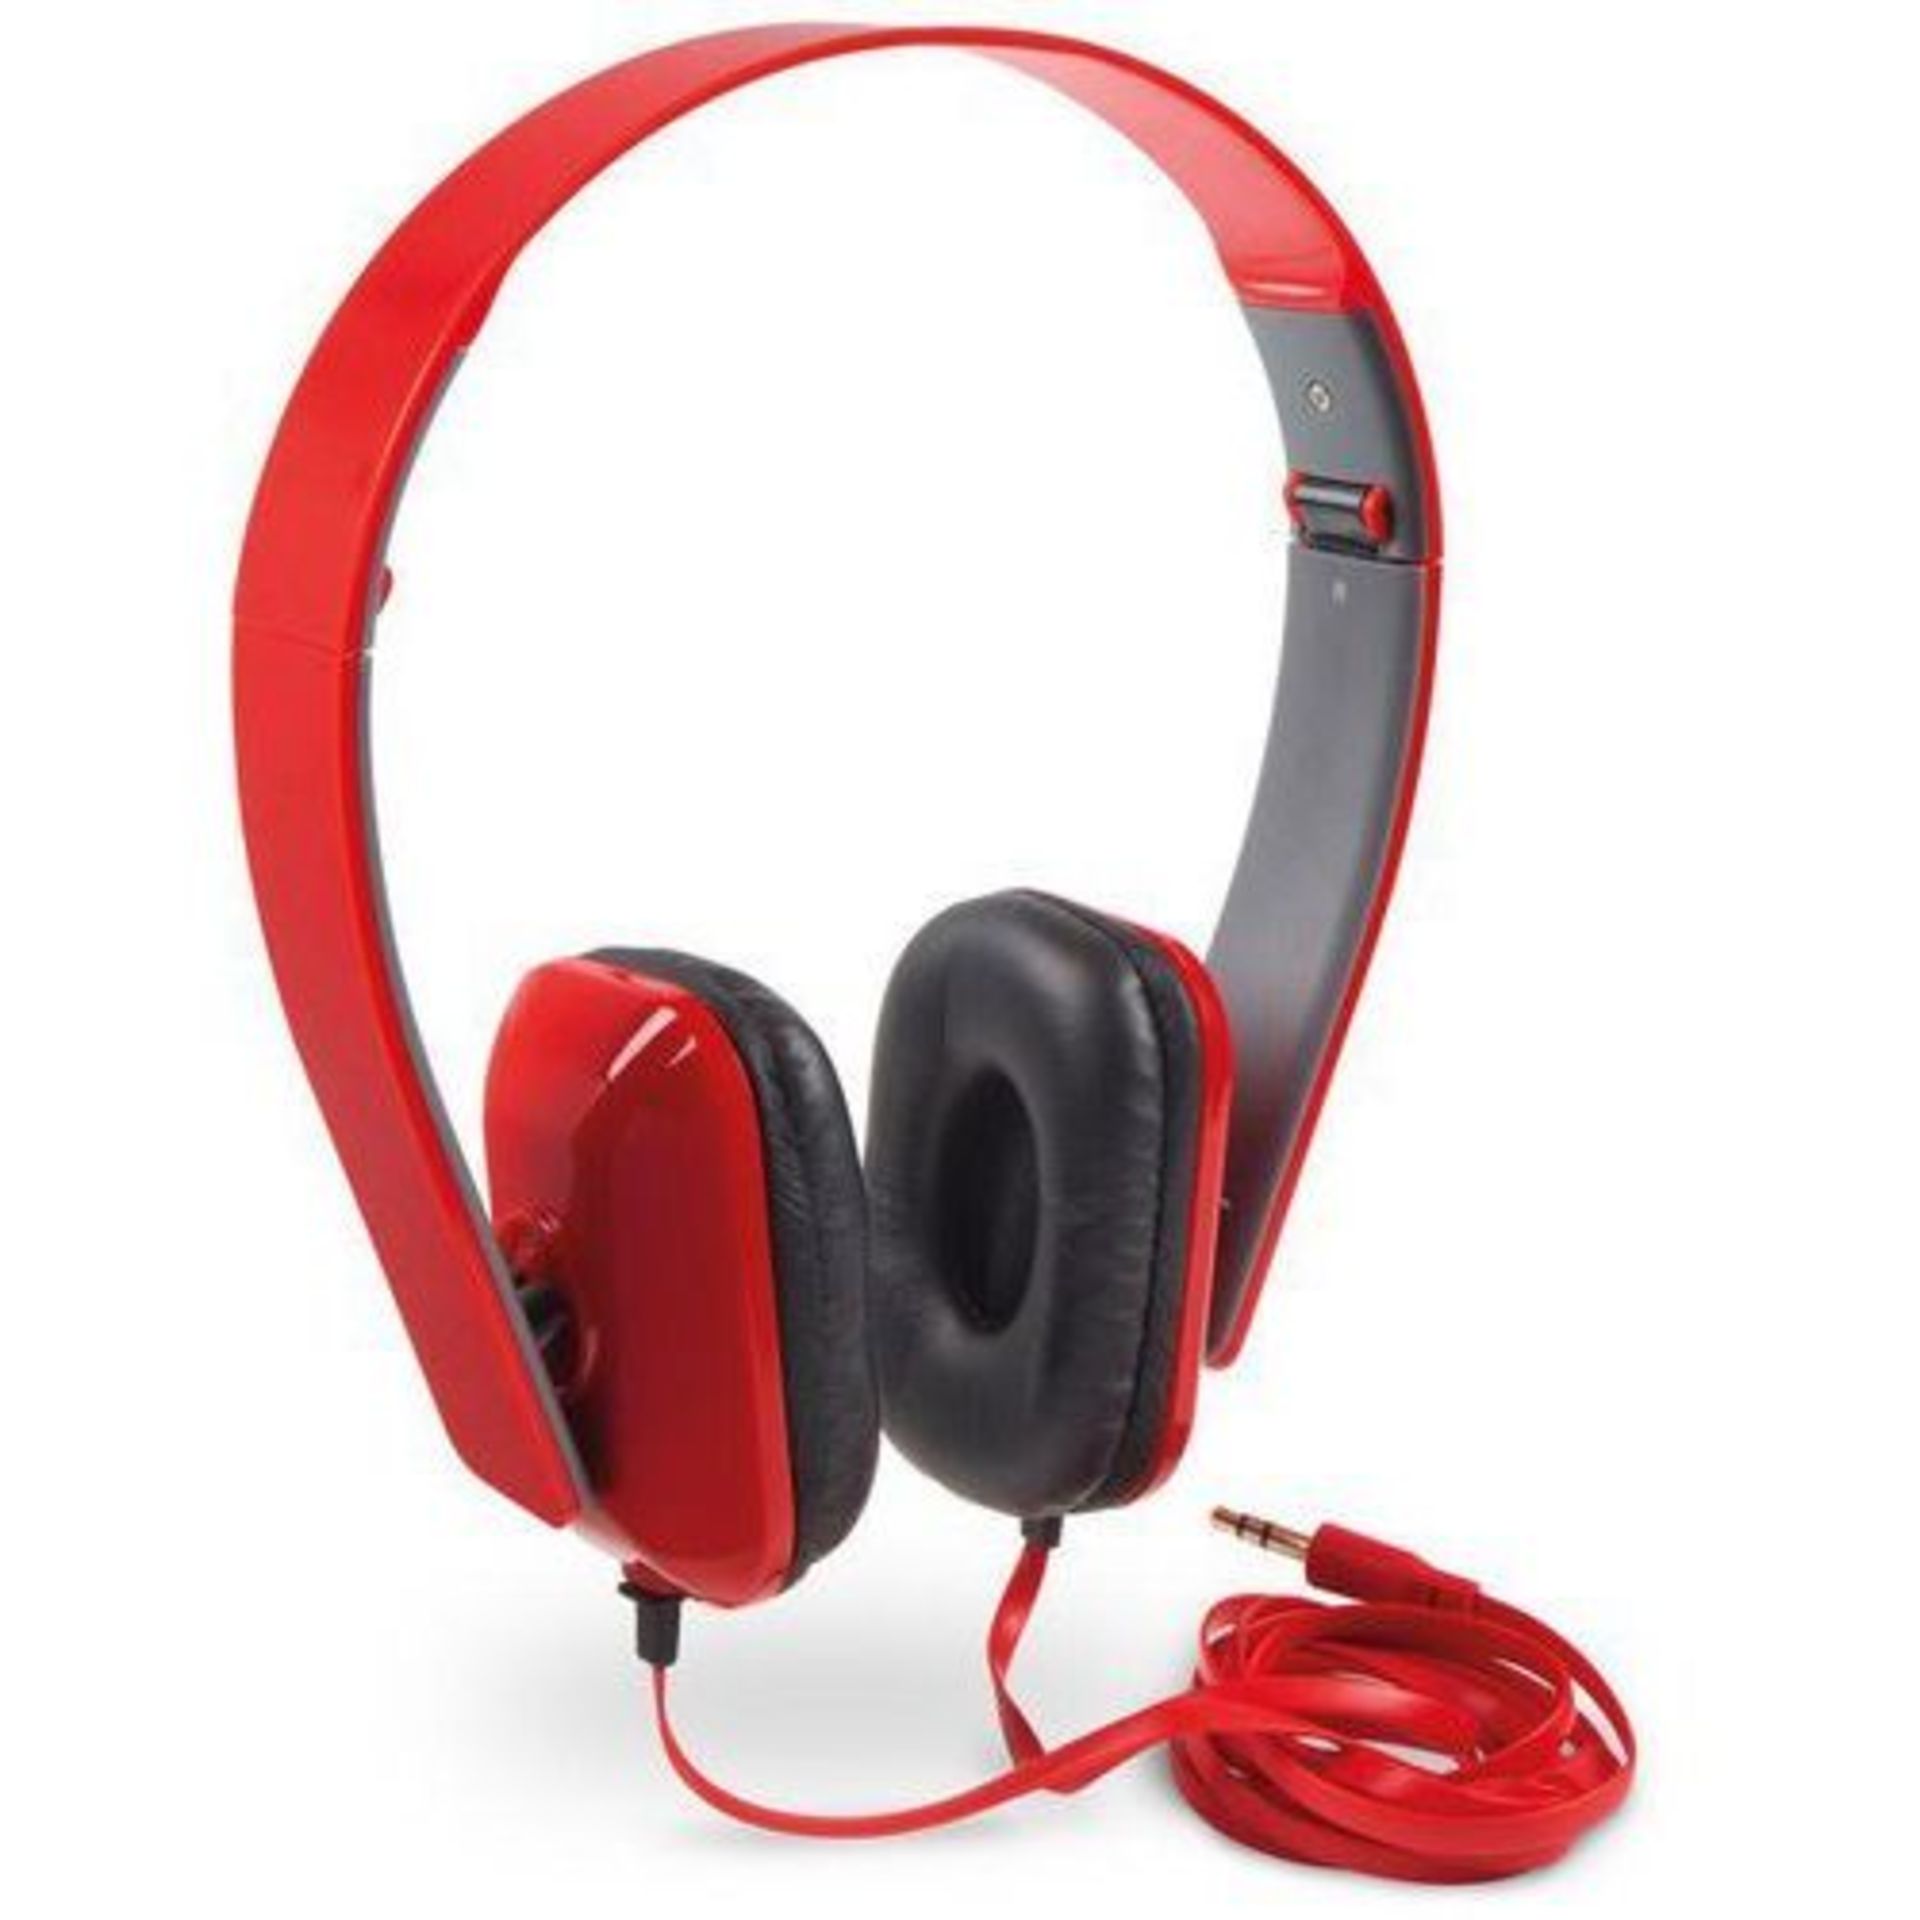 V *TRADE QTY* Brand New Targus Carry & Listen Headphones X 4 YOUR BID PRICE TO BE MULTIPLIED BY